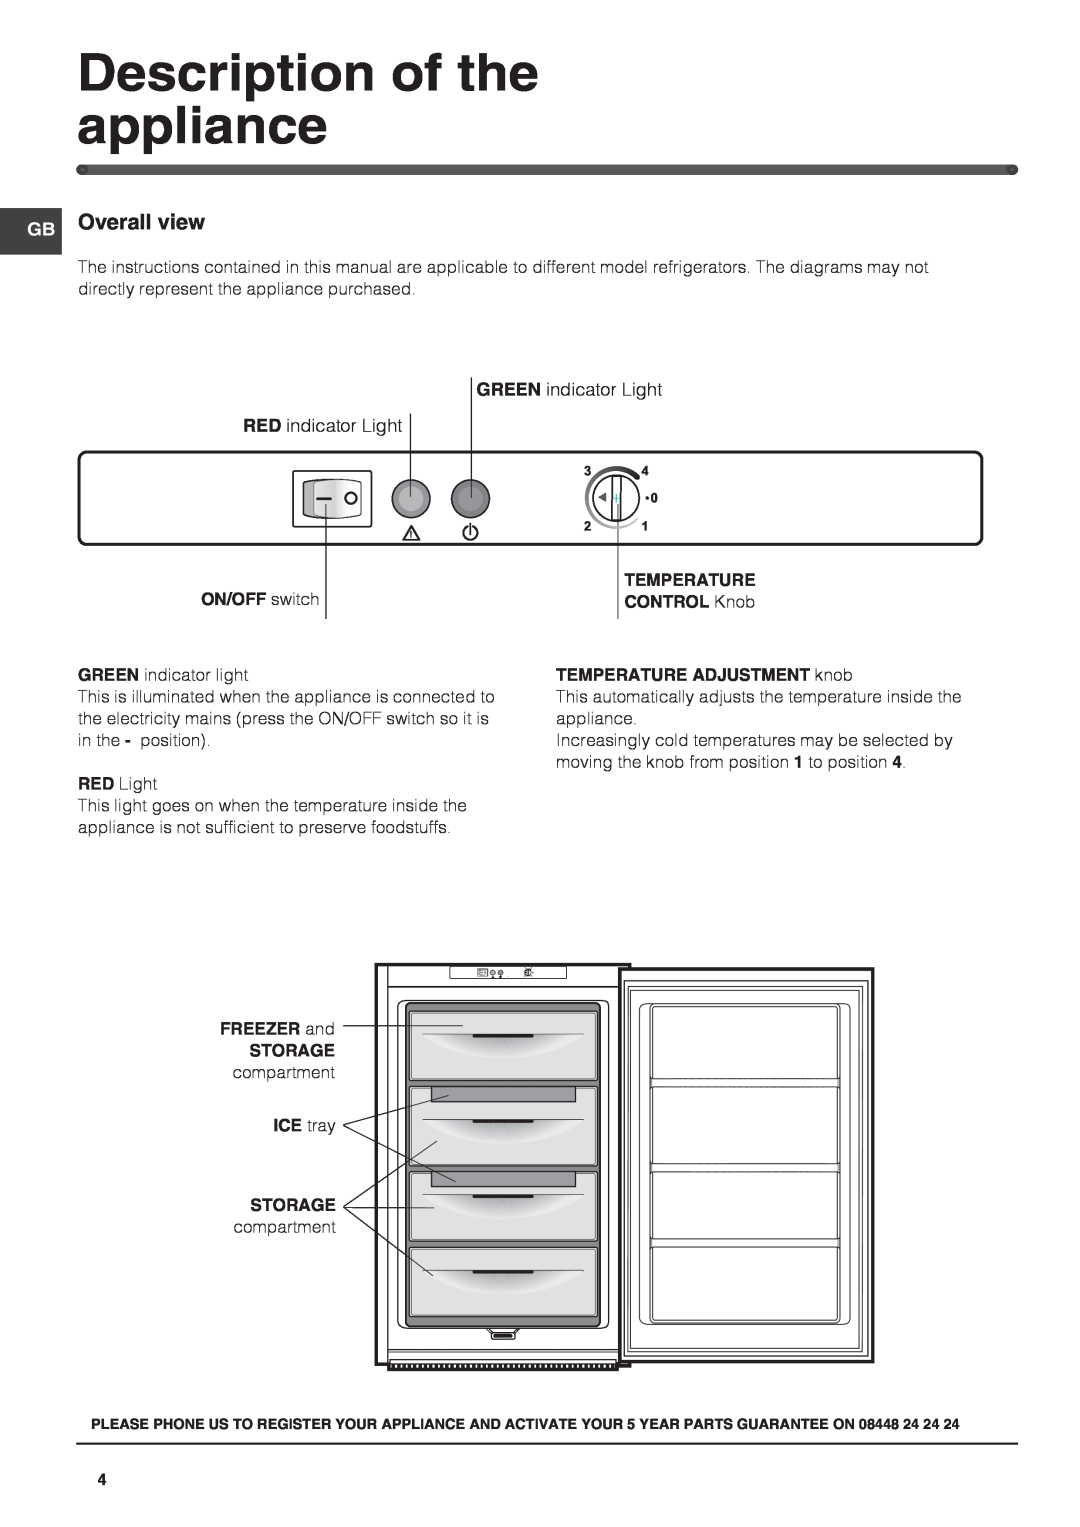 Hotpoint KSZ1422.1 manual Description of the appliance, GB Overall view, ON/OFF switch, FREEZER and, Storage, compartment 